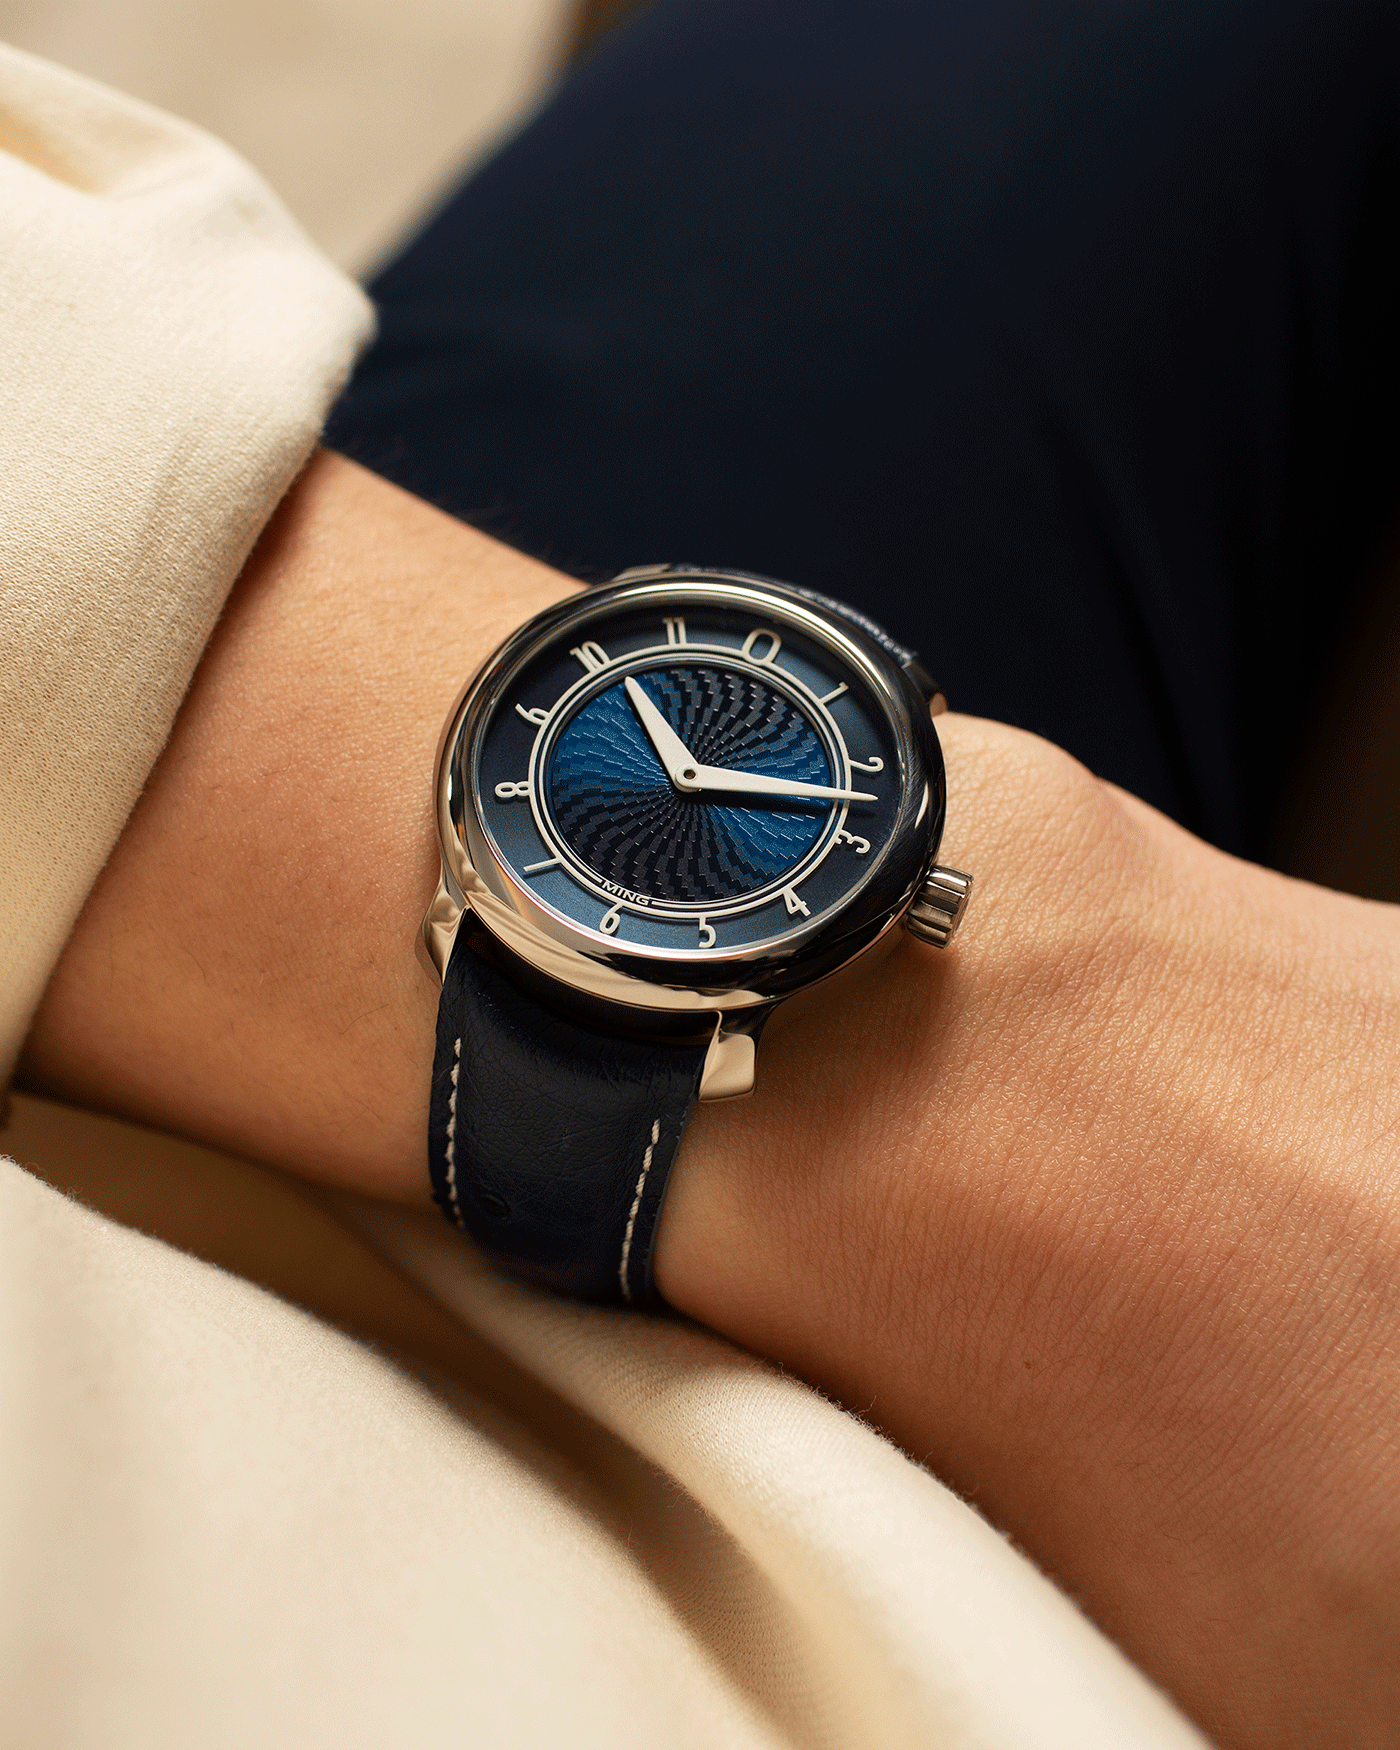 Brand: Ming Year: 2017 Model: 17.01 Material: Grade 5 Titanium Movement: Hand-winding mechanical movement Sellita SW210-1 Case Diameter: 38mm Strap: Jean Rousseau Blue Strap for MING